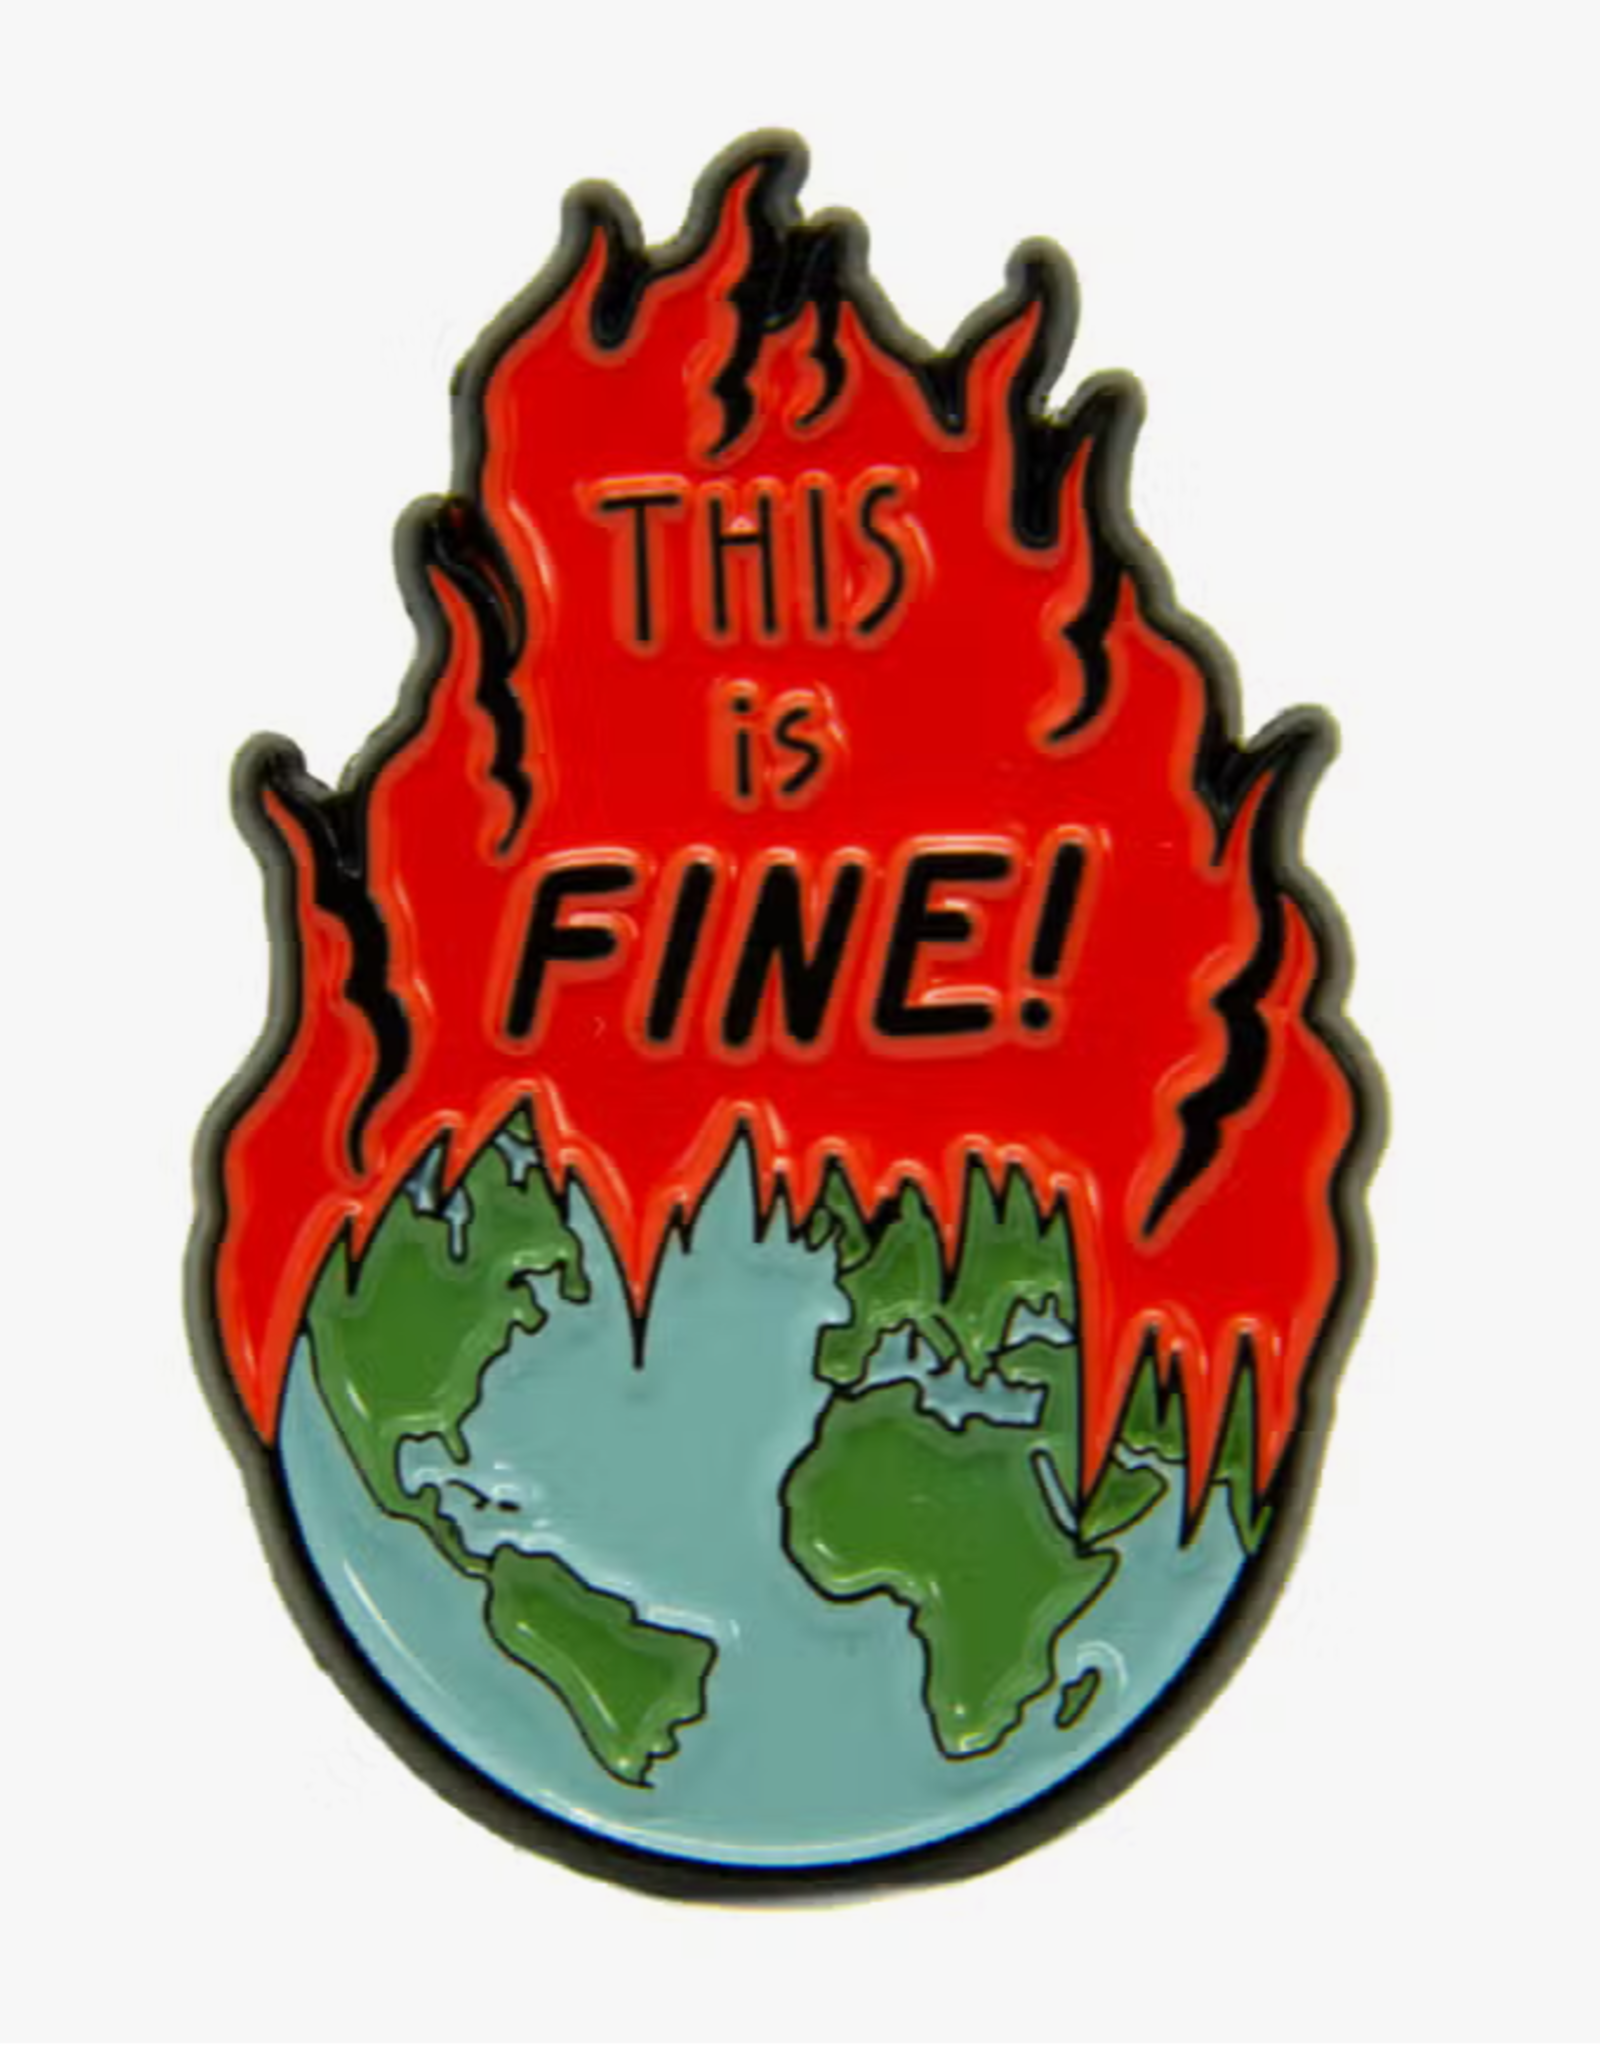 "This is Fine!" Earth on Fire Enamel Pin